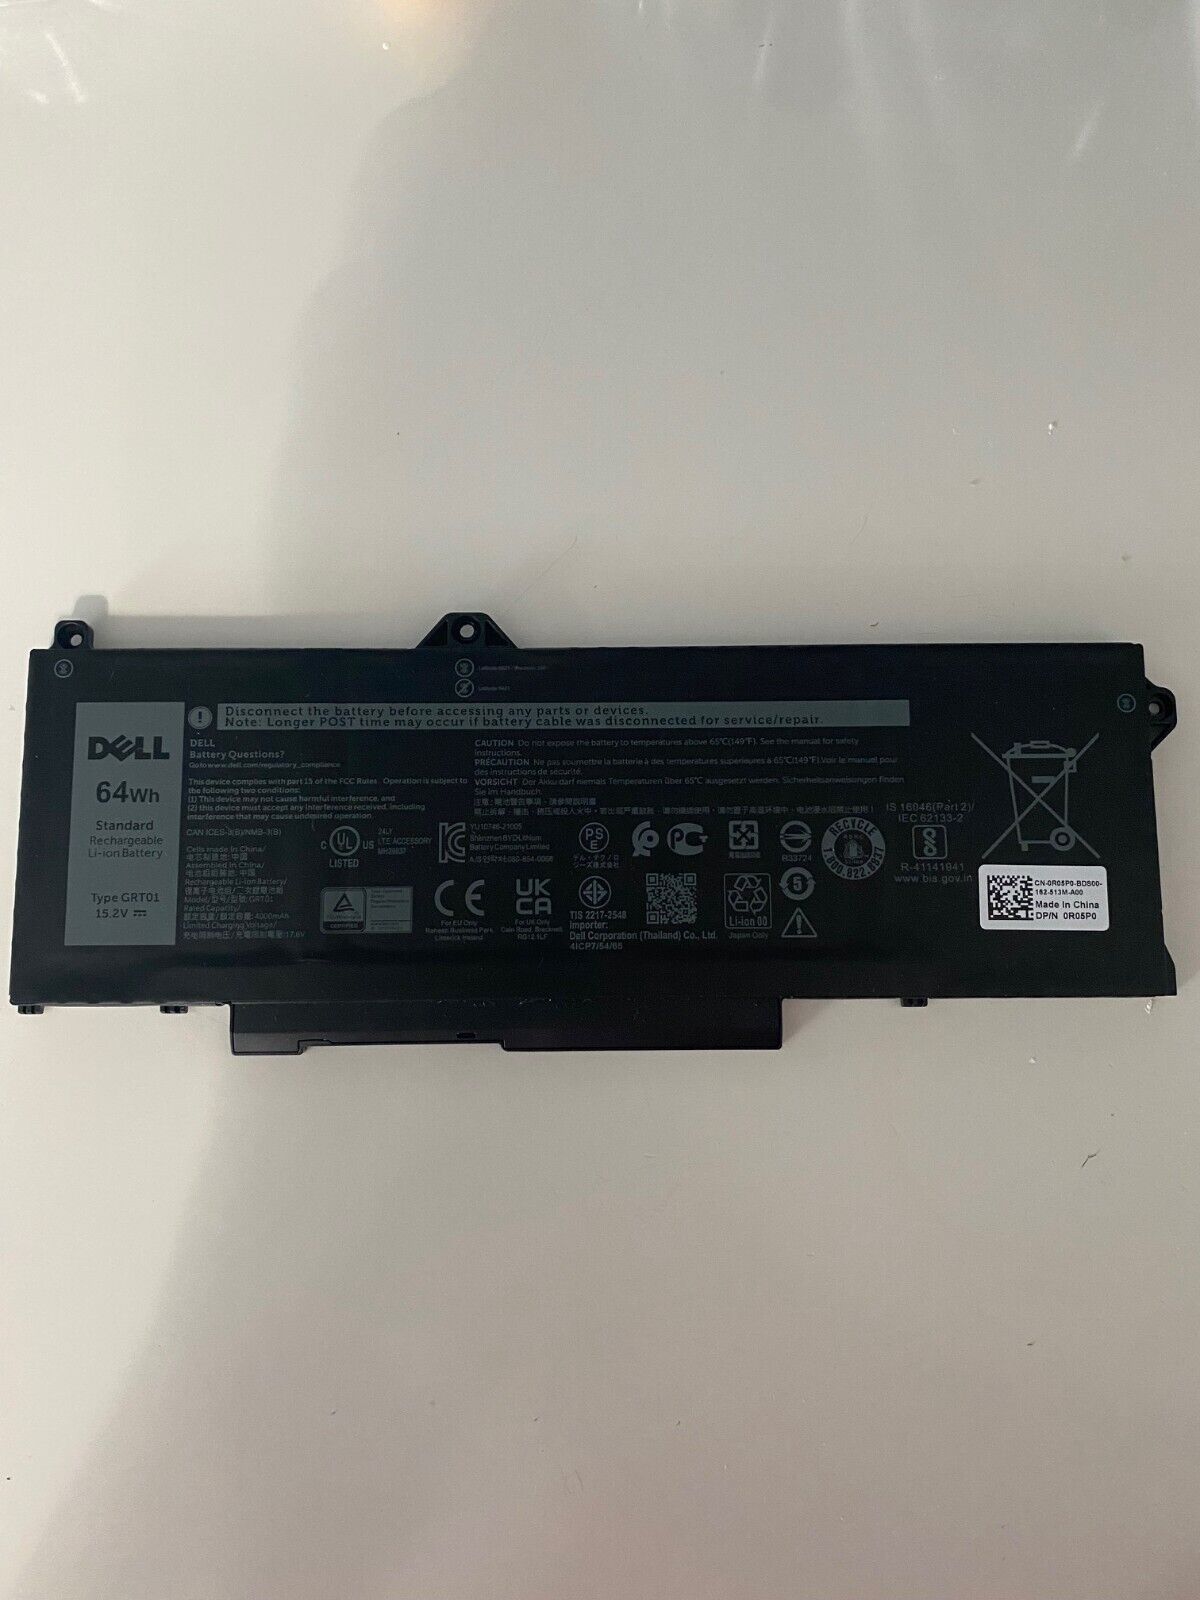 New OEM DELL GRT01 R05P0 15.2V 64Wh 4Cell Battery Dell Precision 15 3571 Laptop